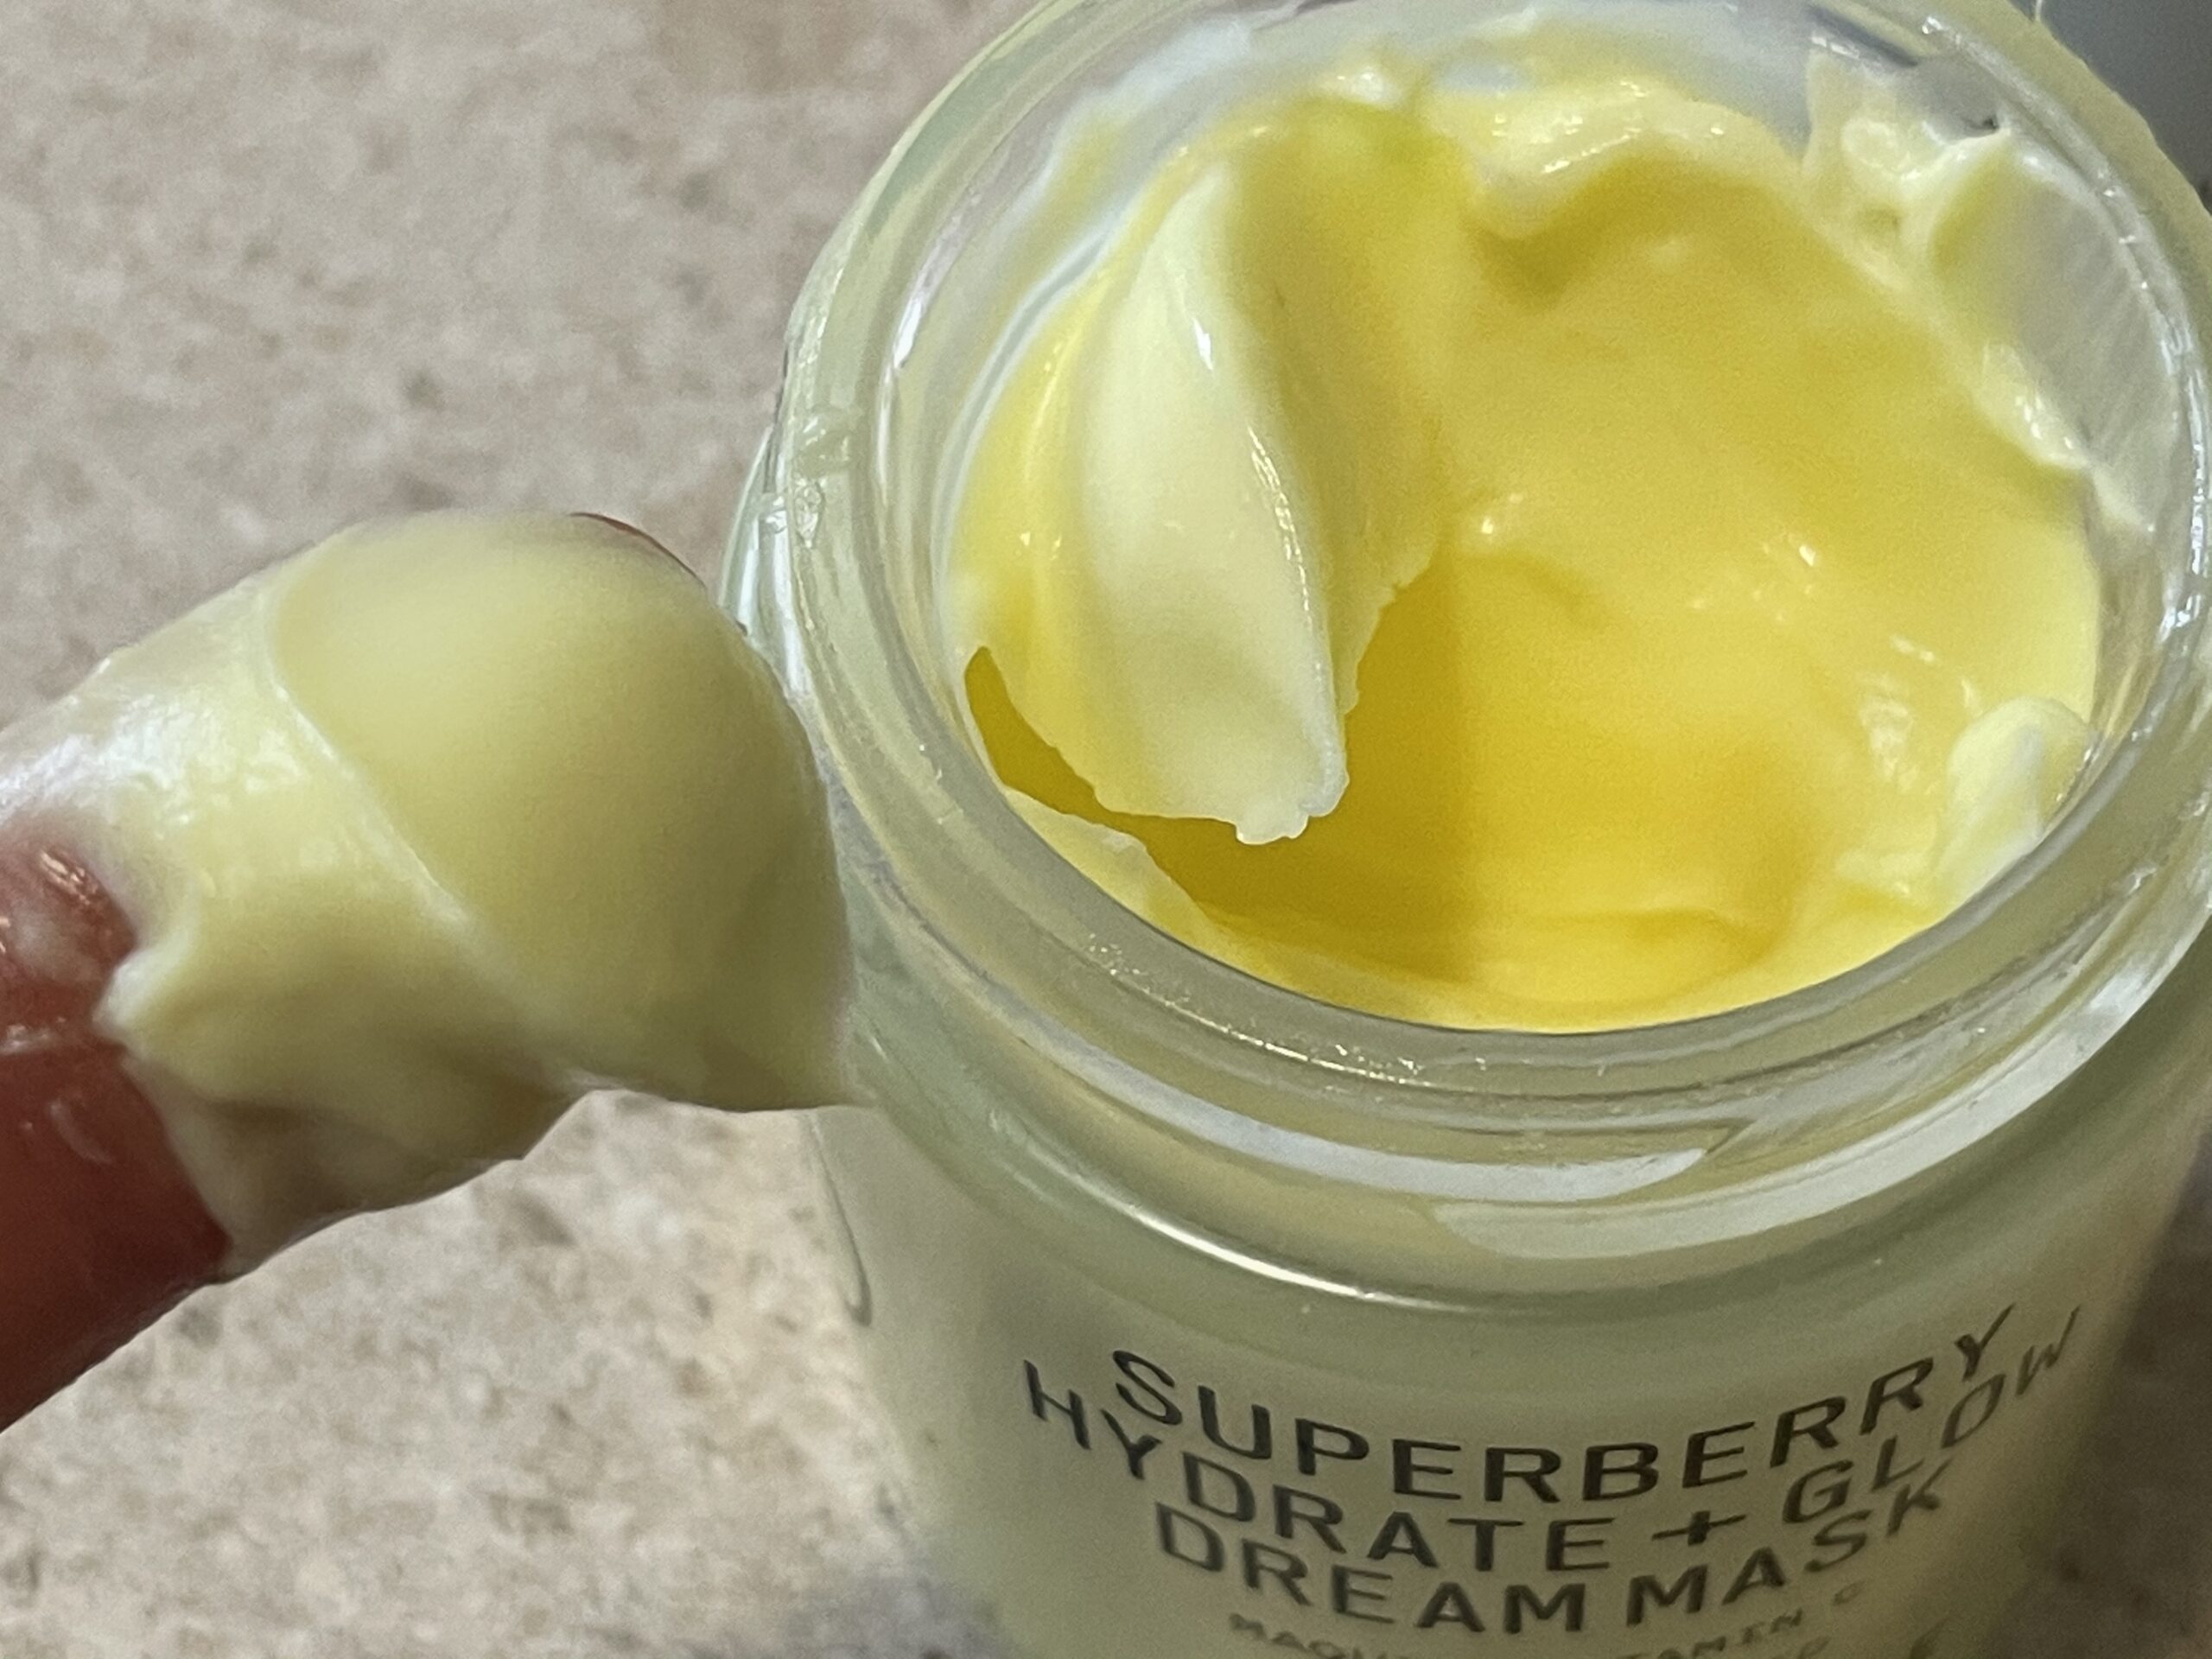 Youth to the people Superberry hydrate glow Dream mask